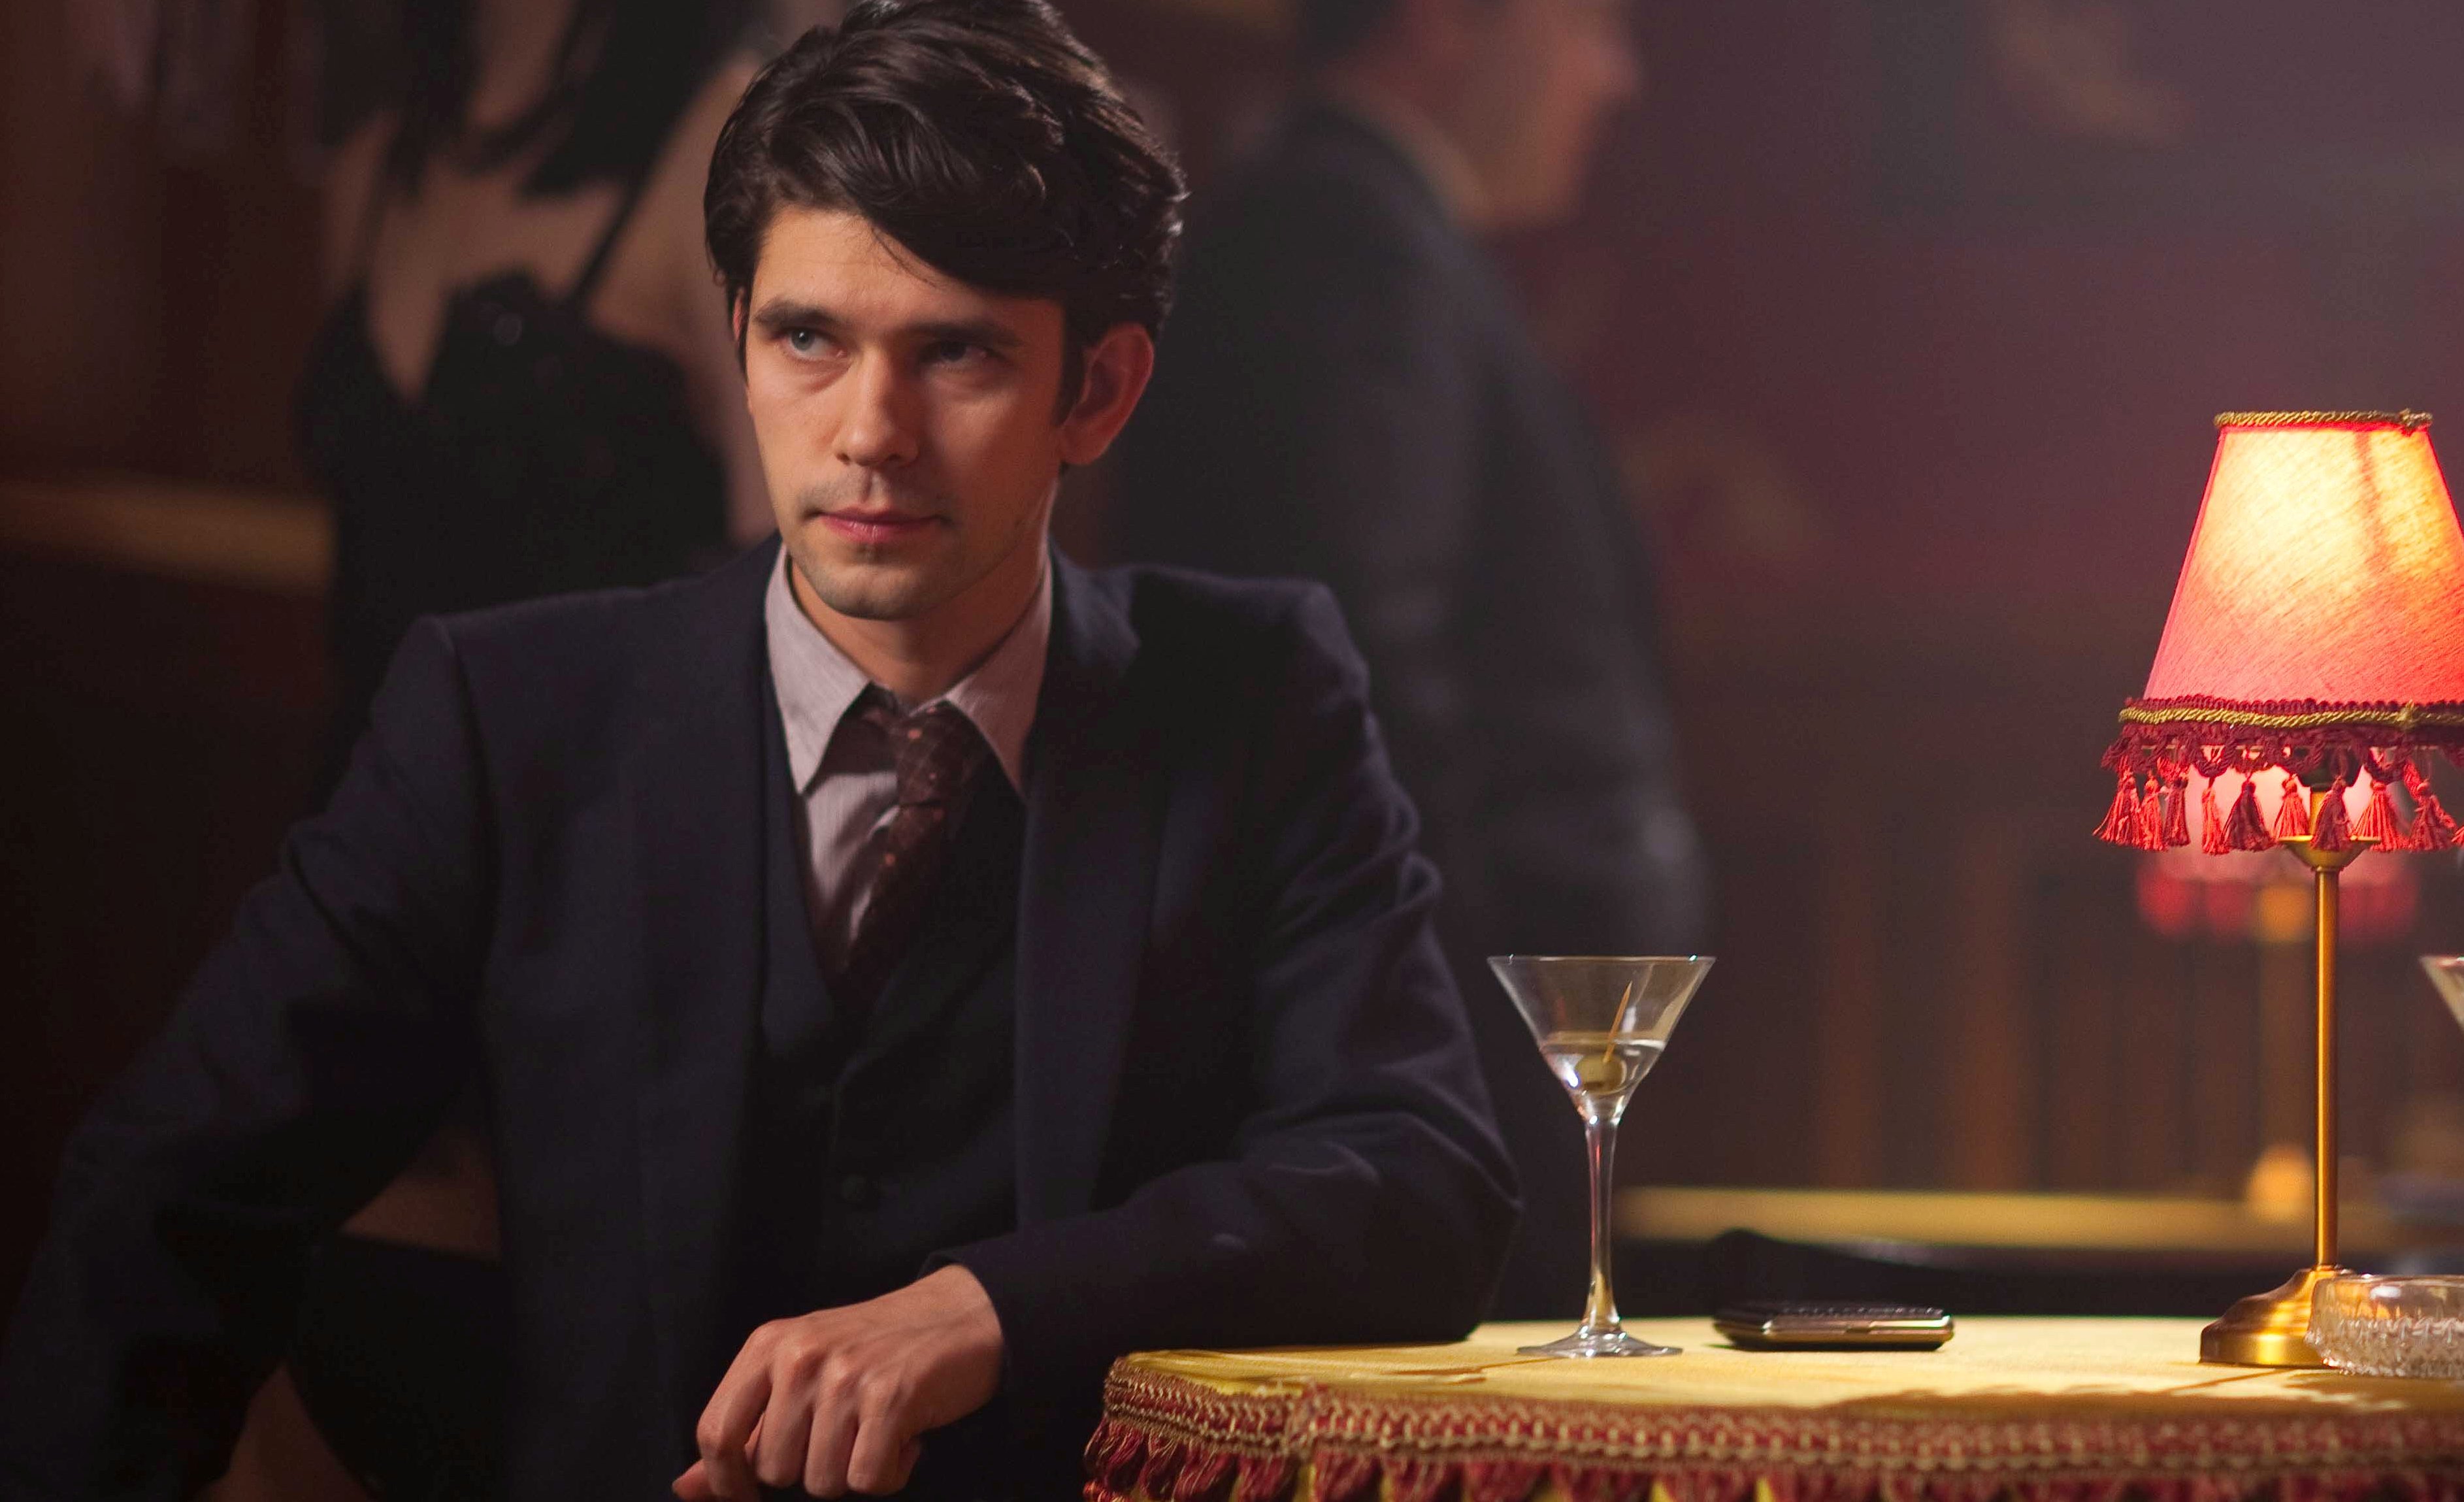 Ben Whishaw in a snazzy suit in "The Hour" (Photo: © Laurence Cendrowicz / Kudos)